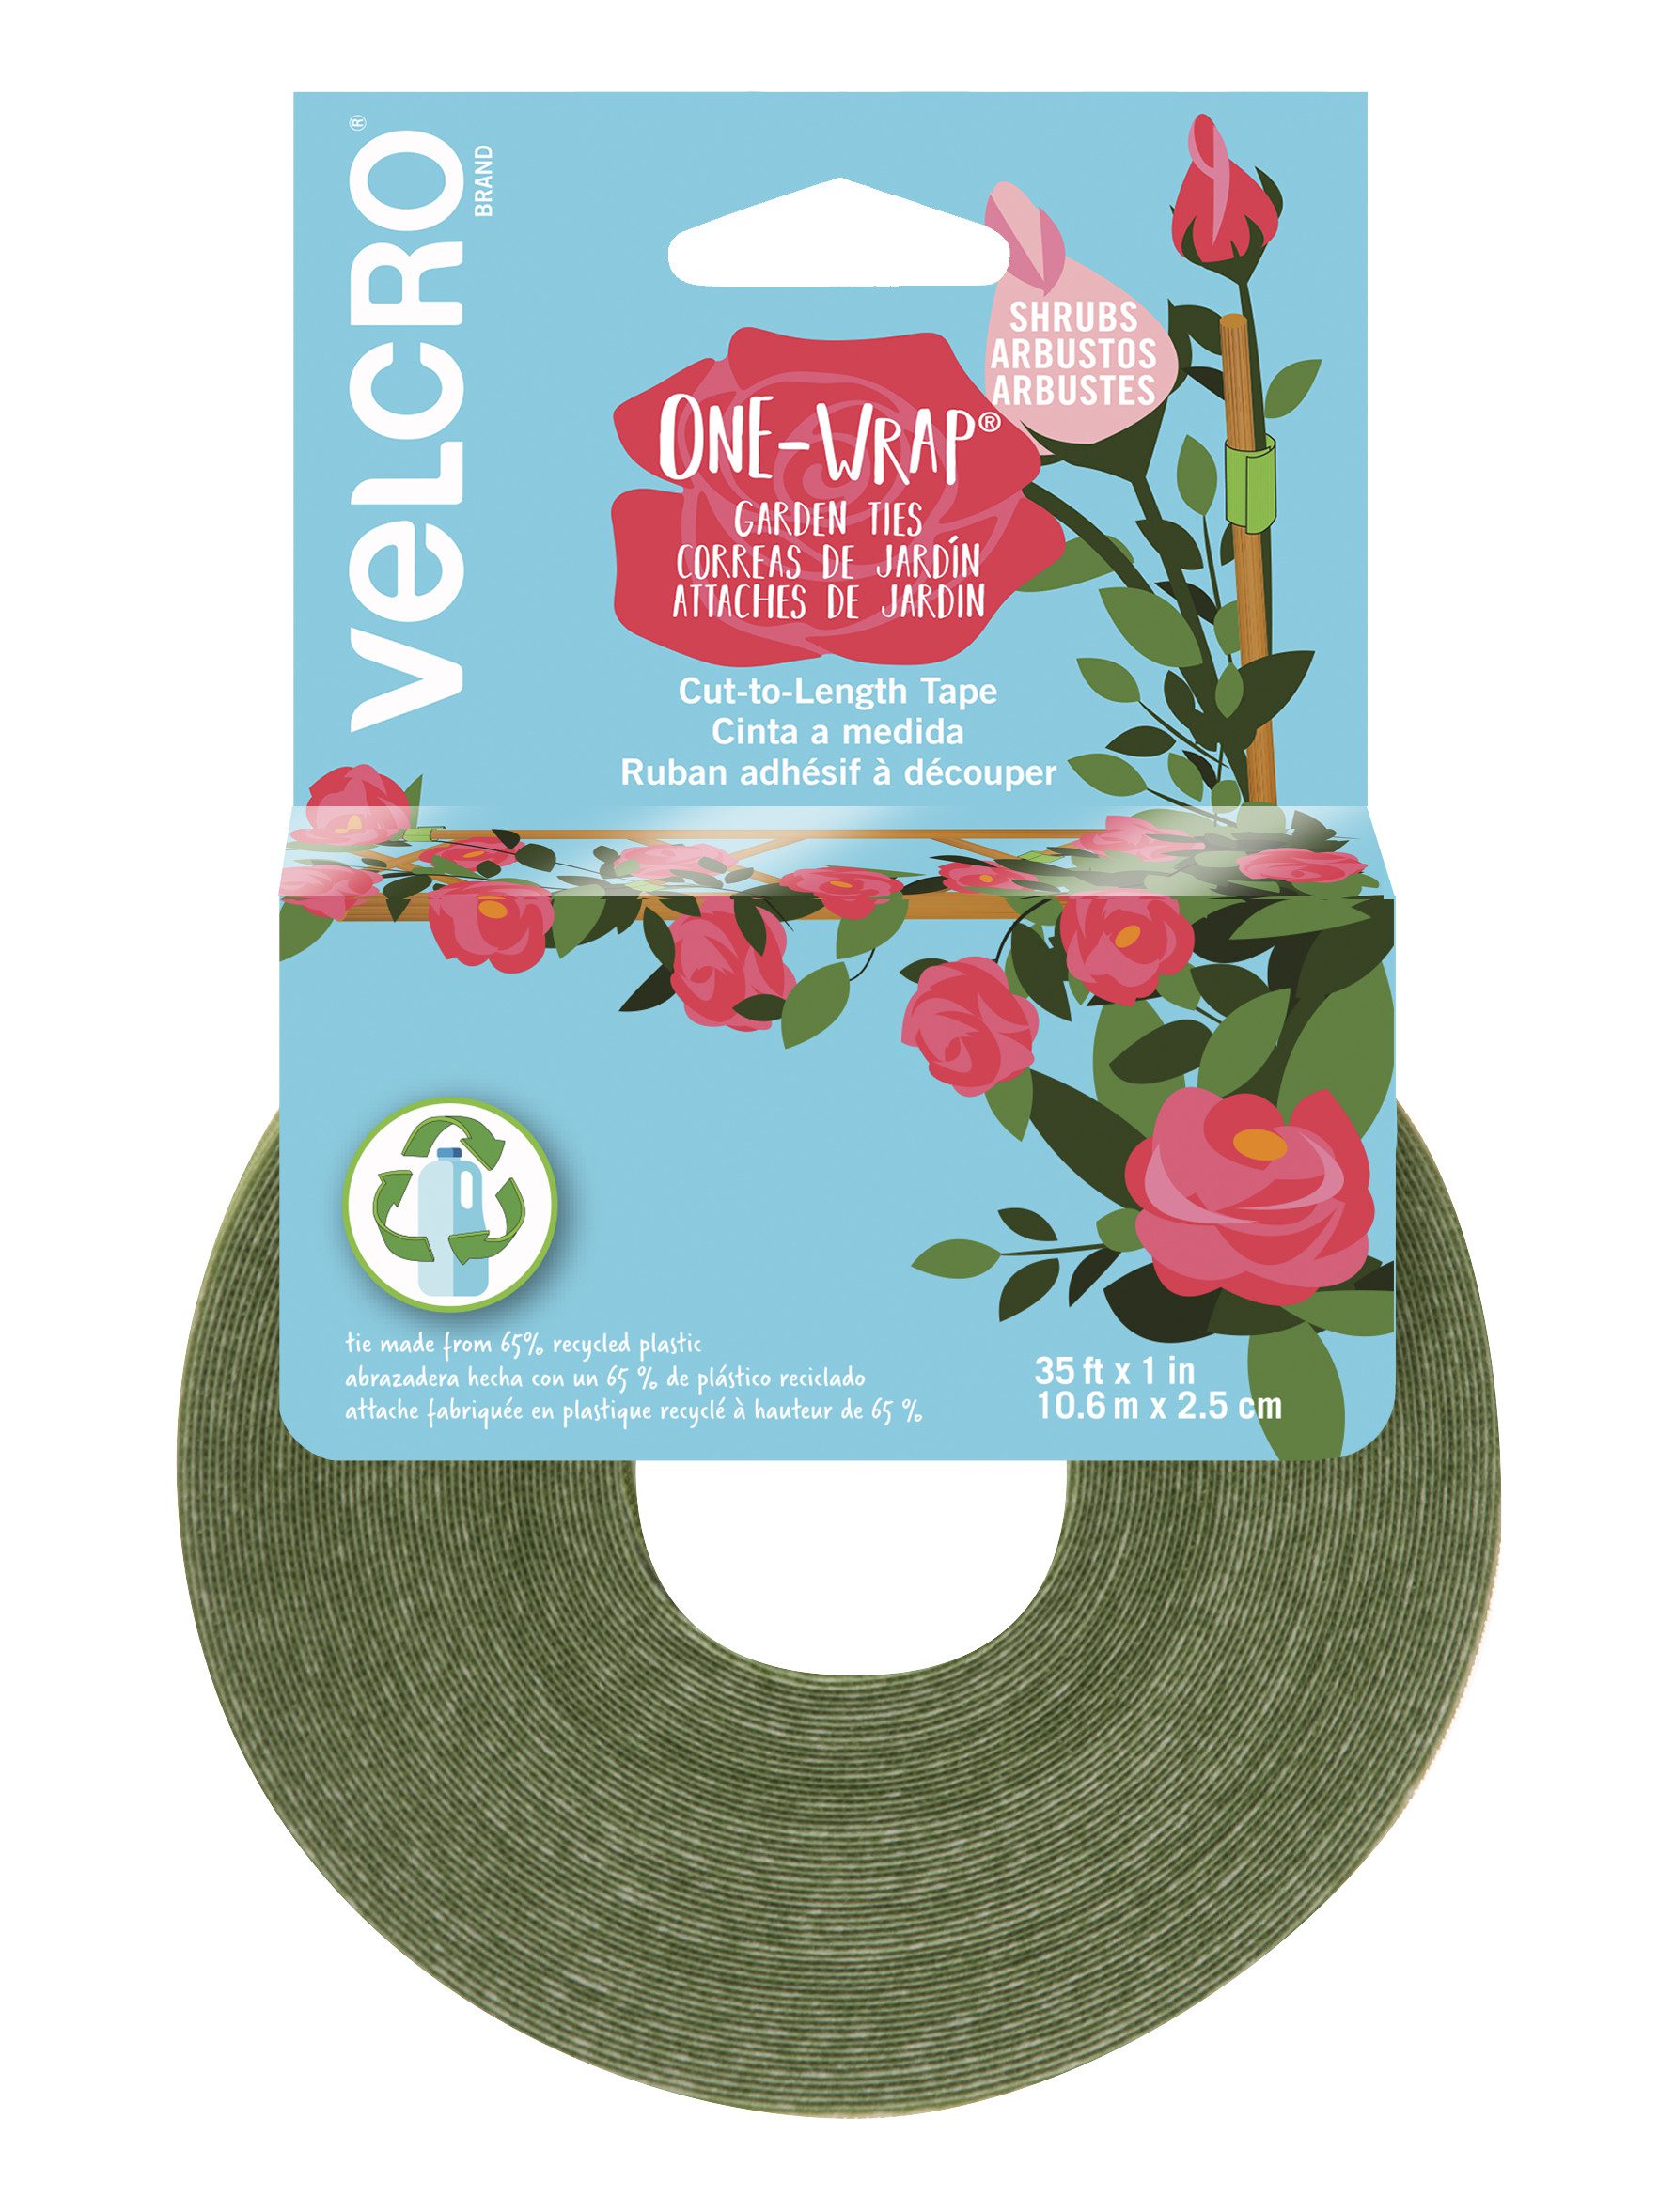 VELCRO BRAND® Garden Ties Made From 65% Recycled Content